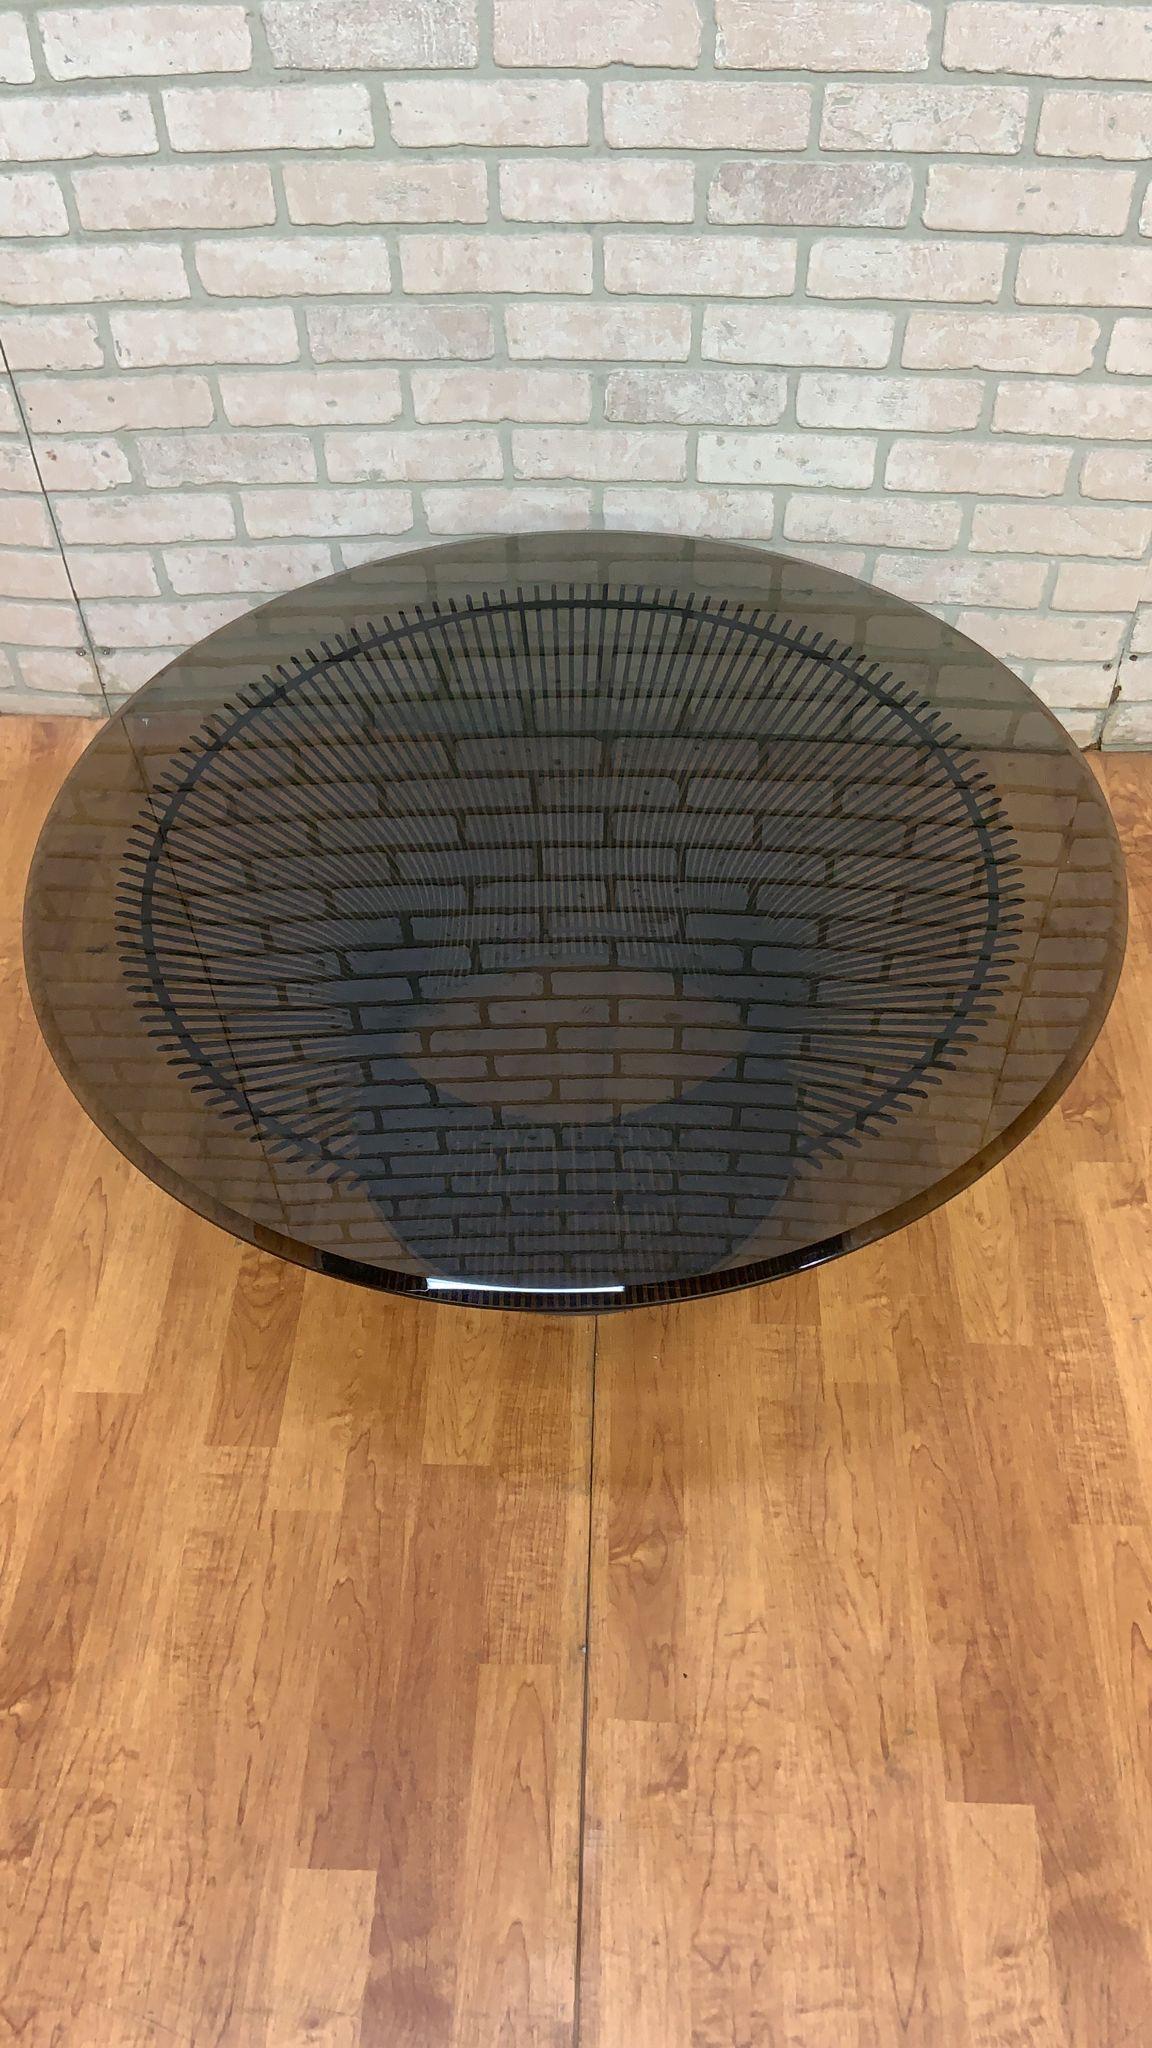 Vintage Mid Century Modern Coffee Table by Warren Platner for Knoll

An iconic classic mid century modern circular cocktail table designed by Warren Platner for Knoll. It features a dark bronze wire base with tinted glass top. Original design,